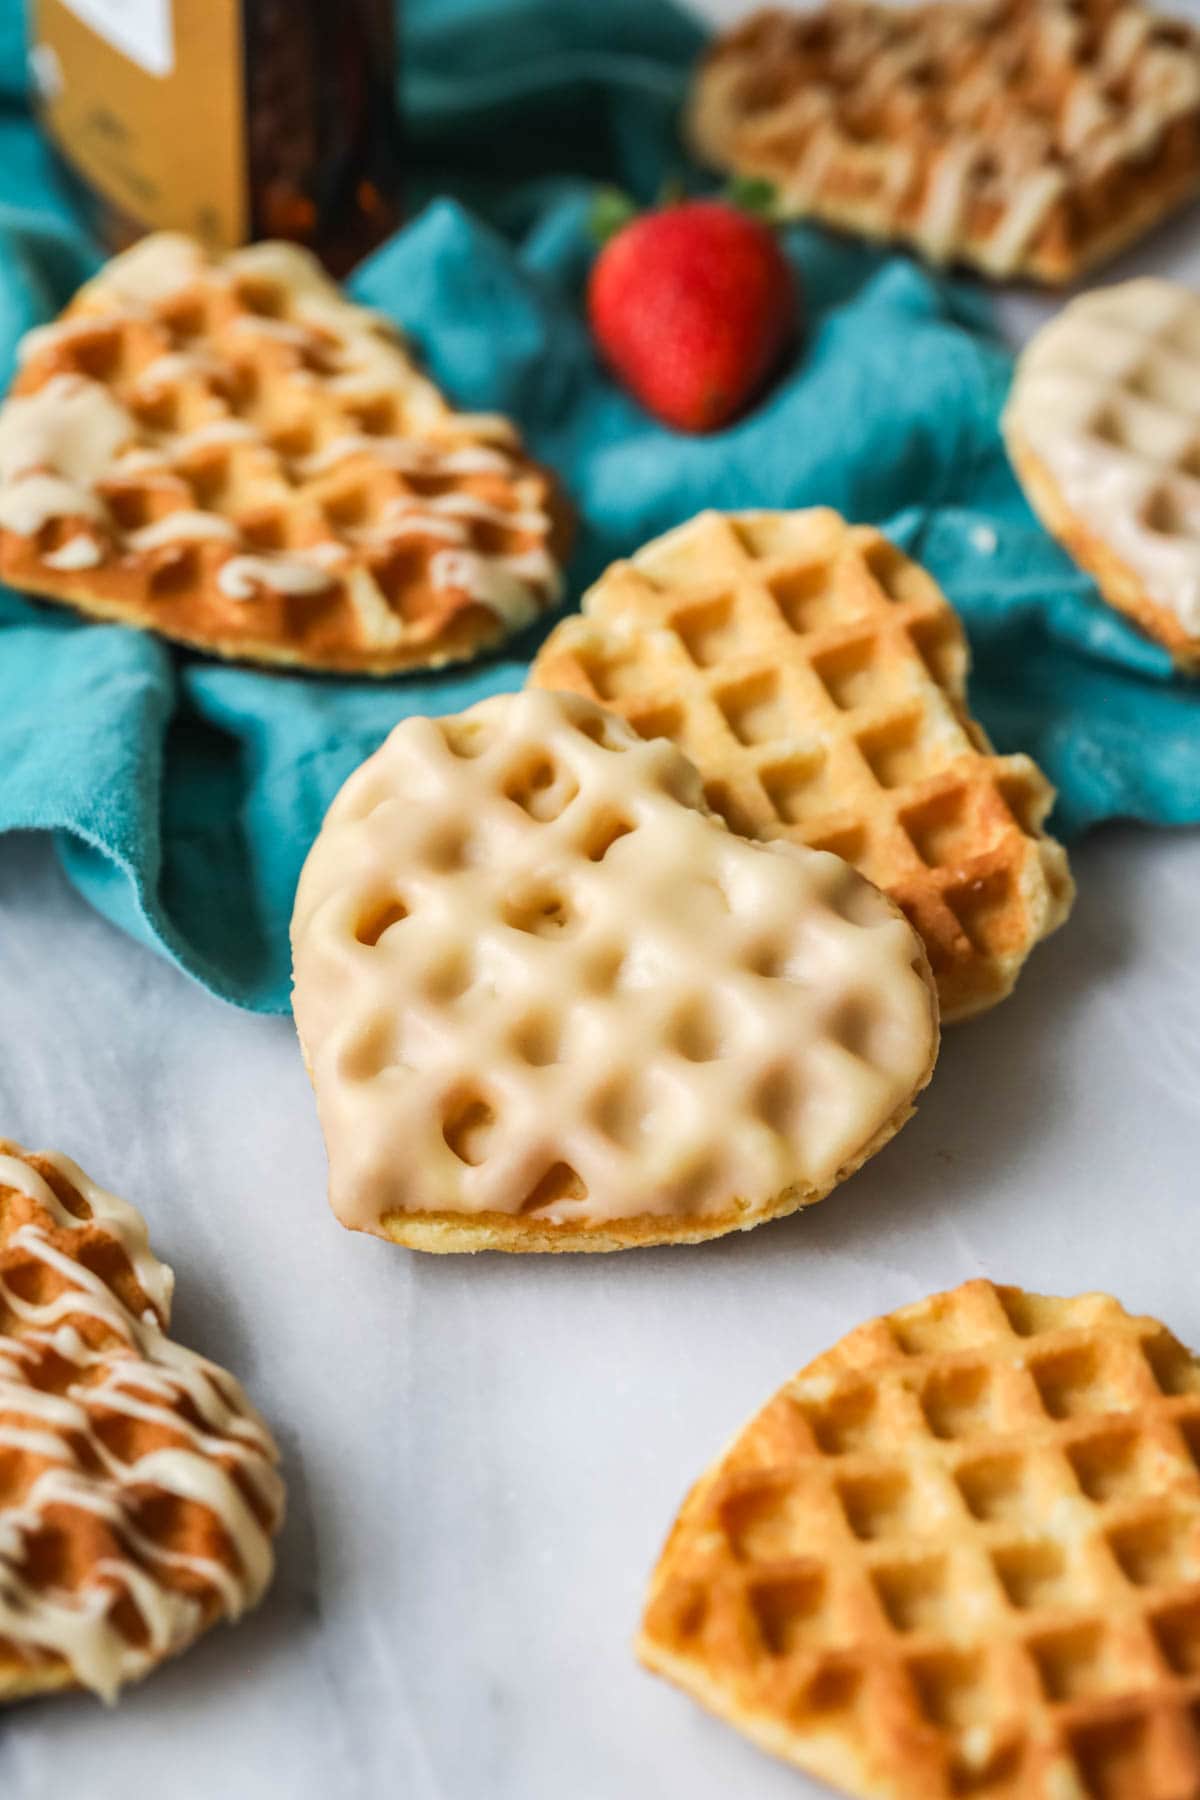 Waffle cookie that's been dipped in glaze surrounded by other cookies that are drizzled with glaze.